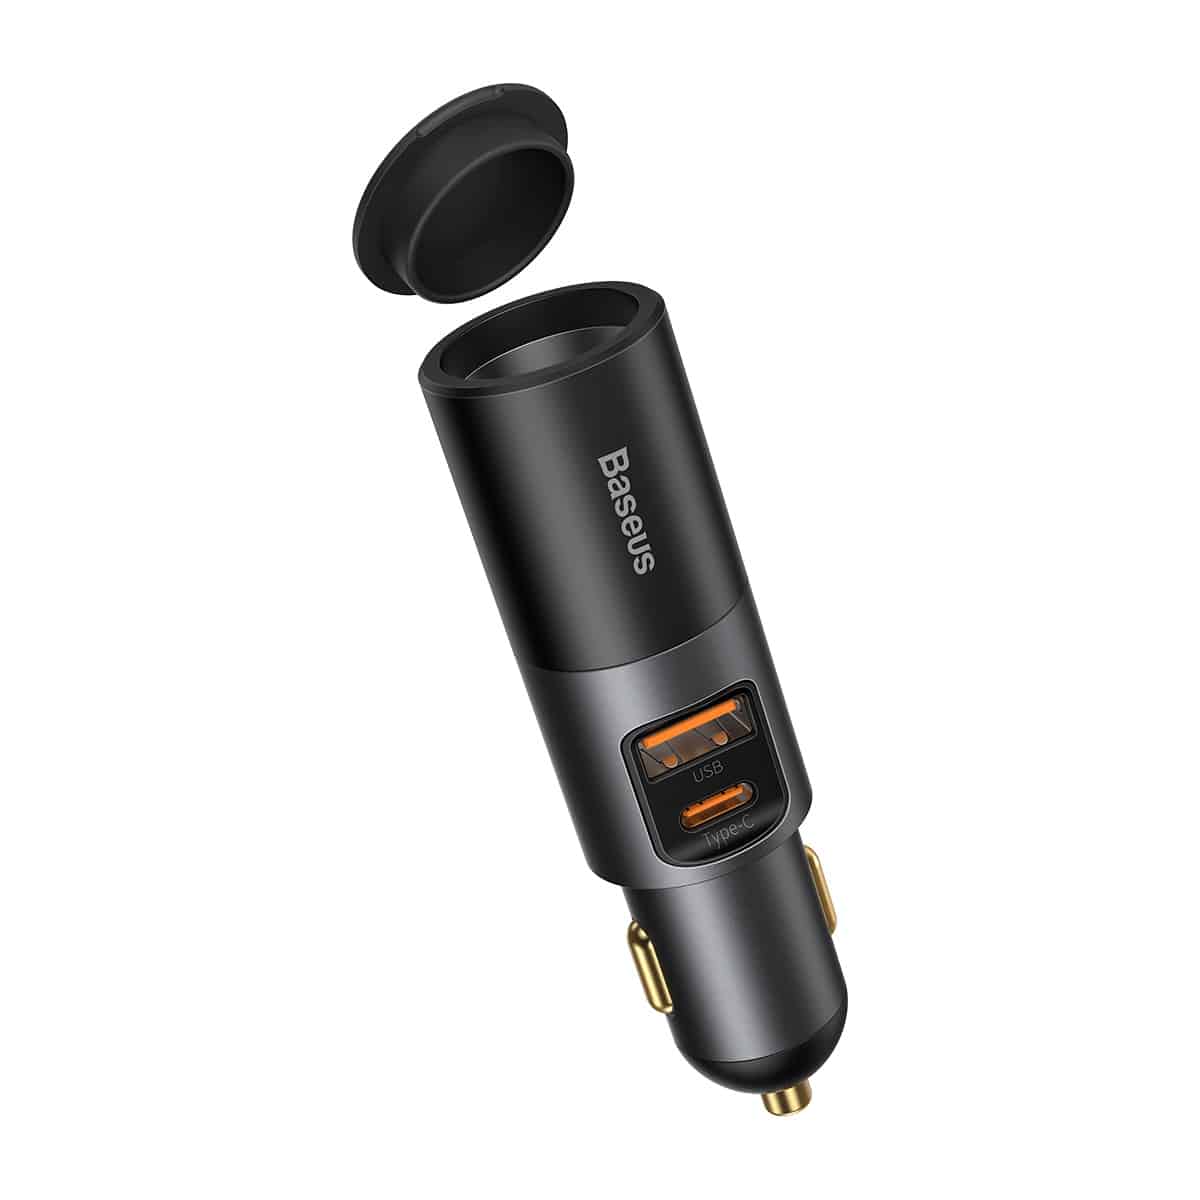 Baseus Share Together Fast Charge Car Charger with Cigarette Lighter Expansion Port USB+Type-C 120W Grey